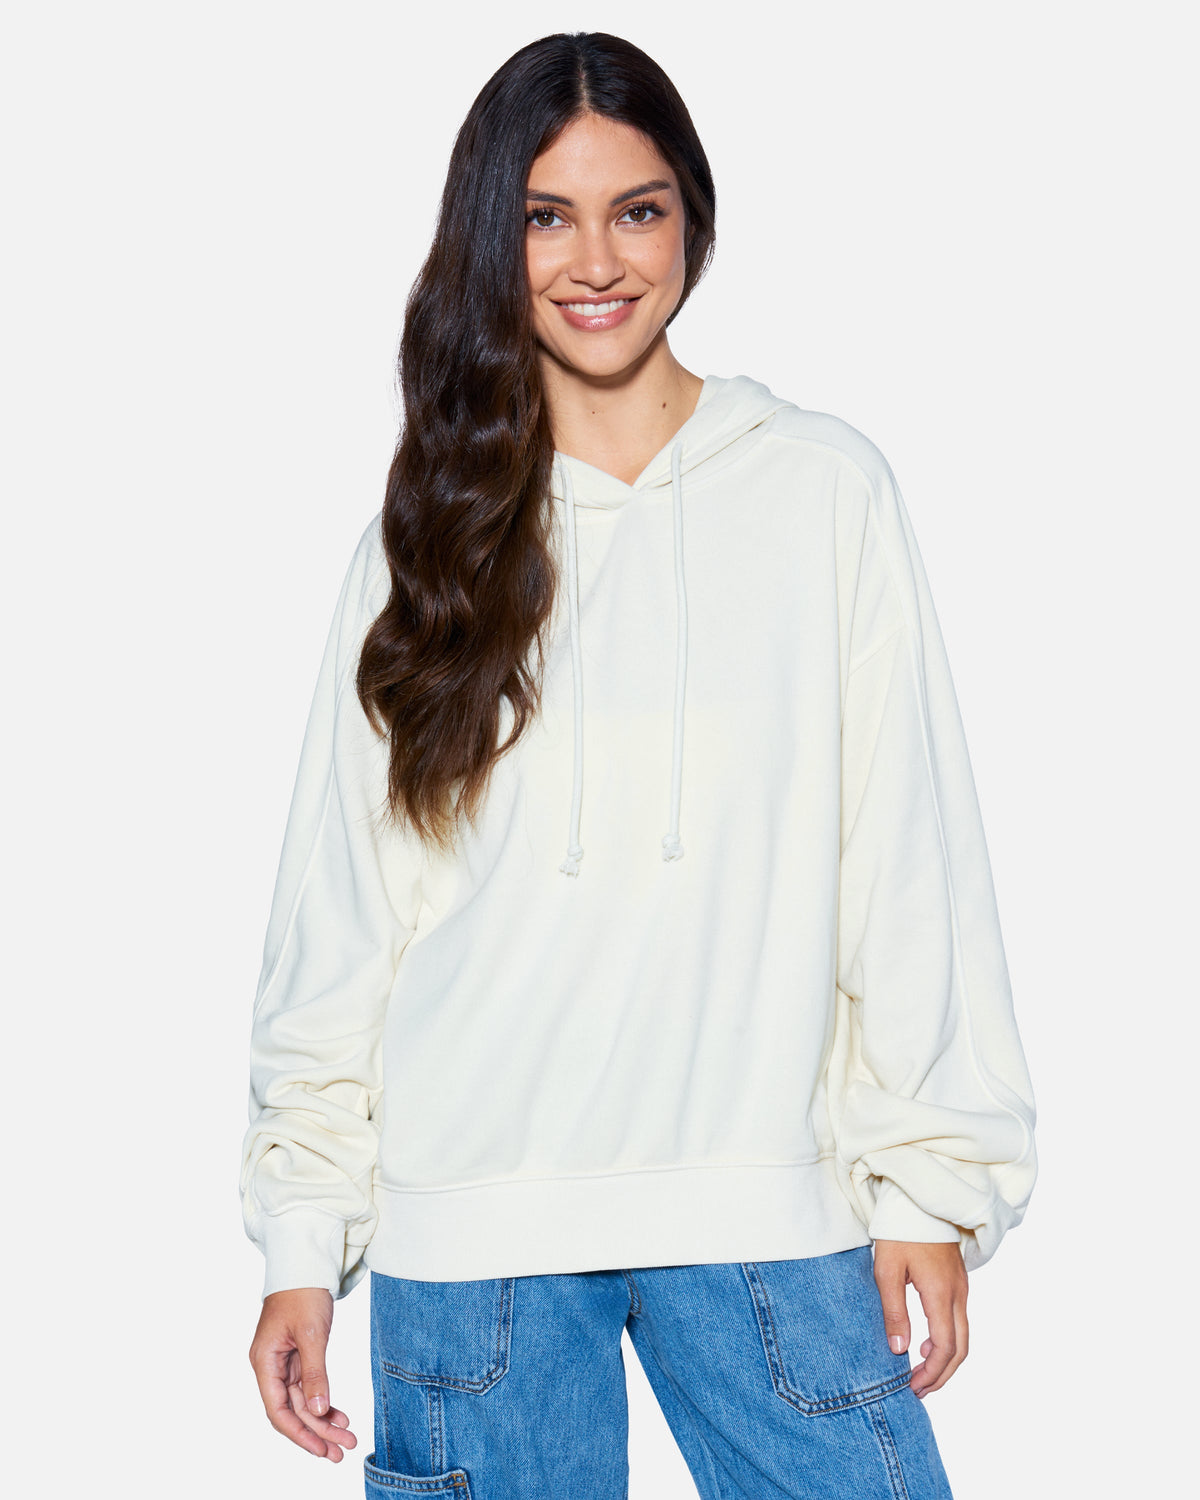 Calvin Klein Women's Long Sleeve Hoodie, White 1, Extra Small at   Women's Clothing store